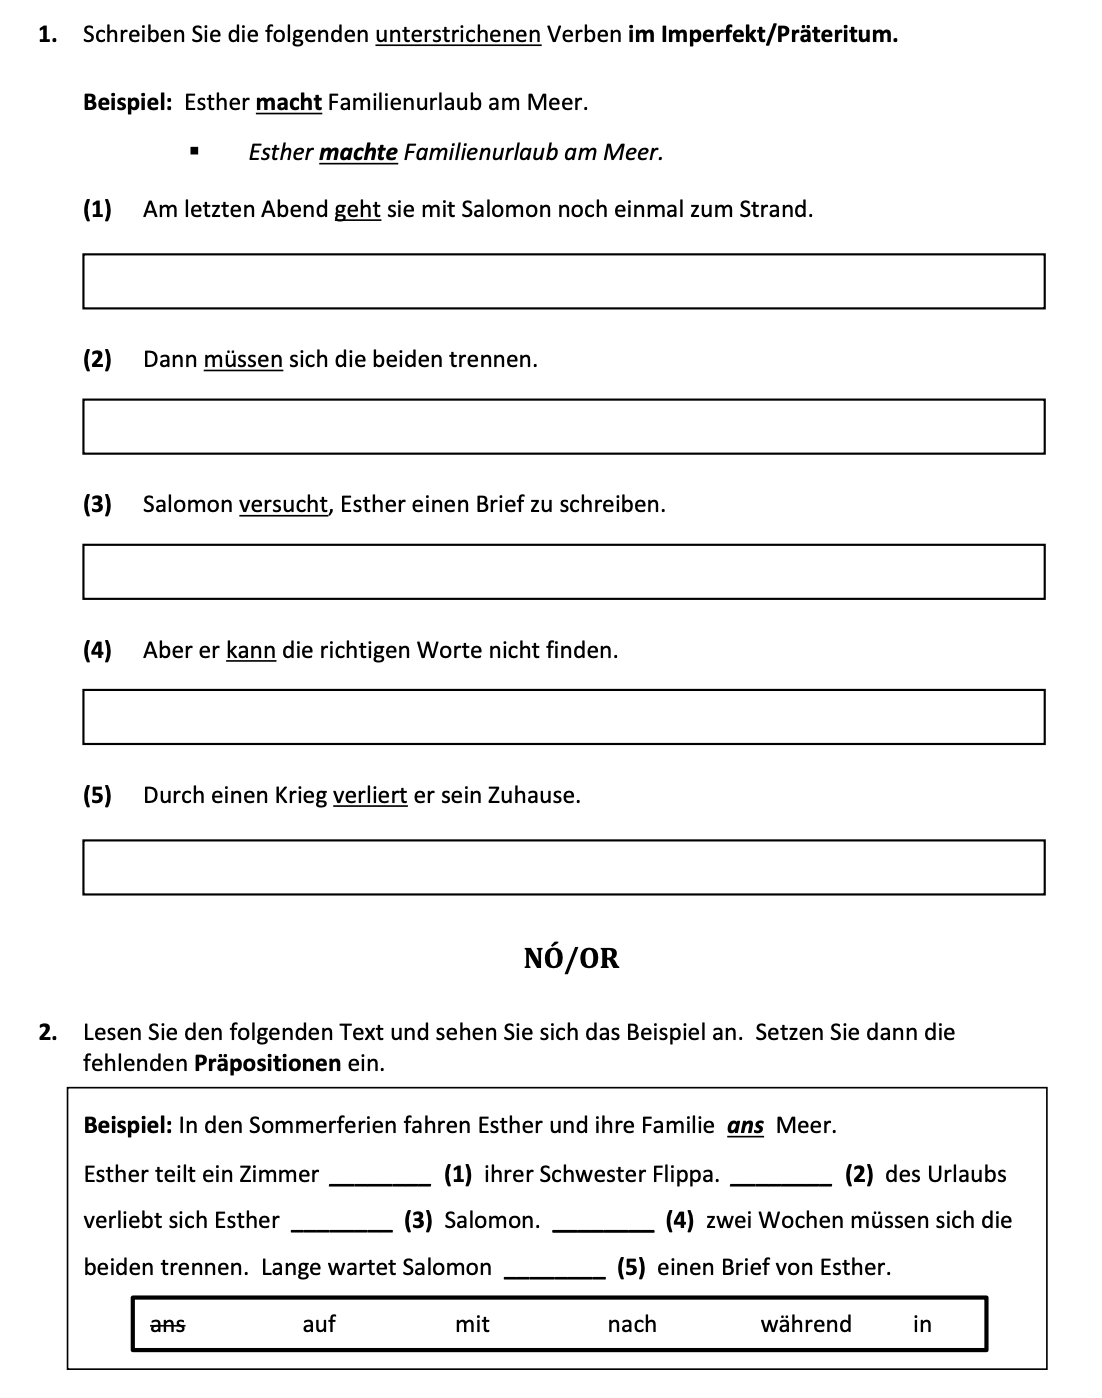 an image of the question 2022 Text I Angewandte Grammatik which is about the topic grammatik and the subject is Leaving Certificate german